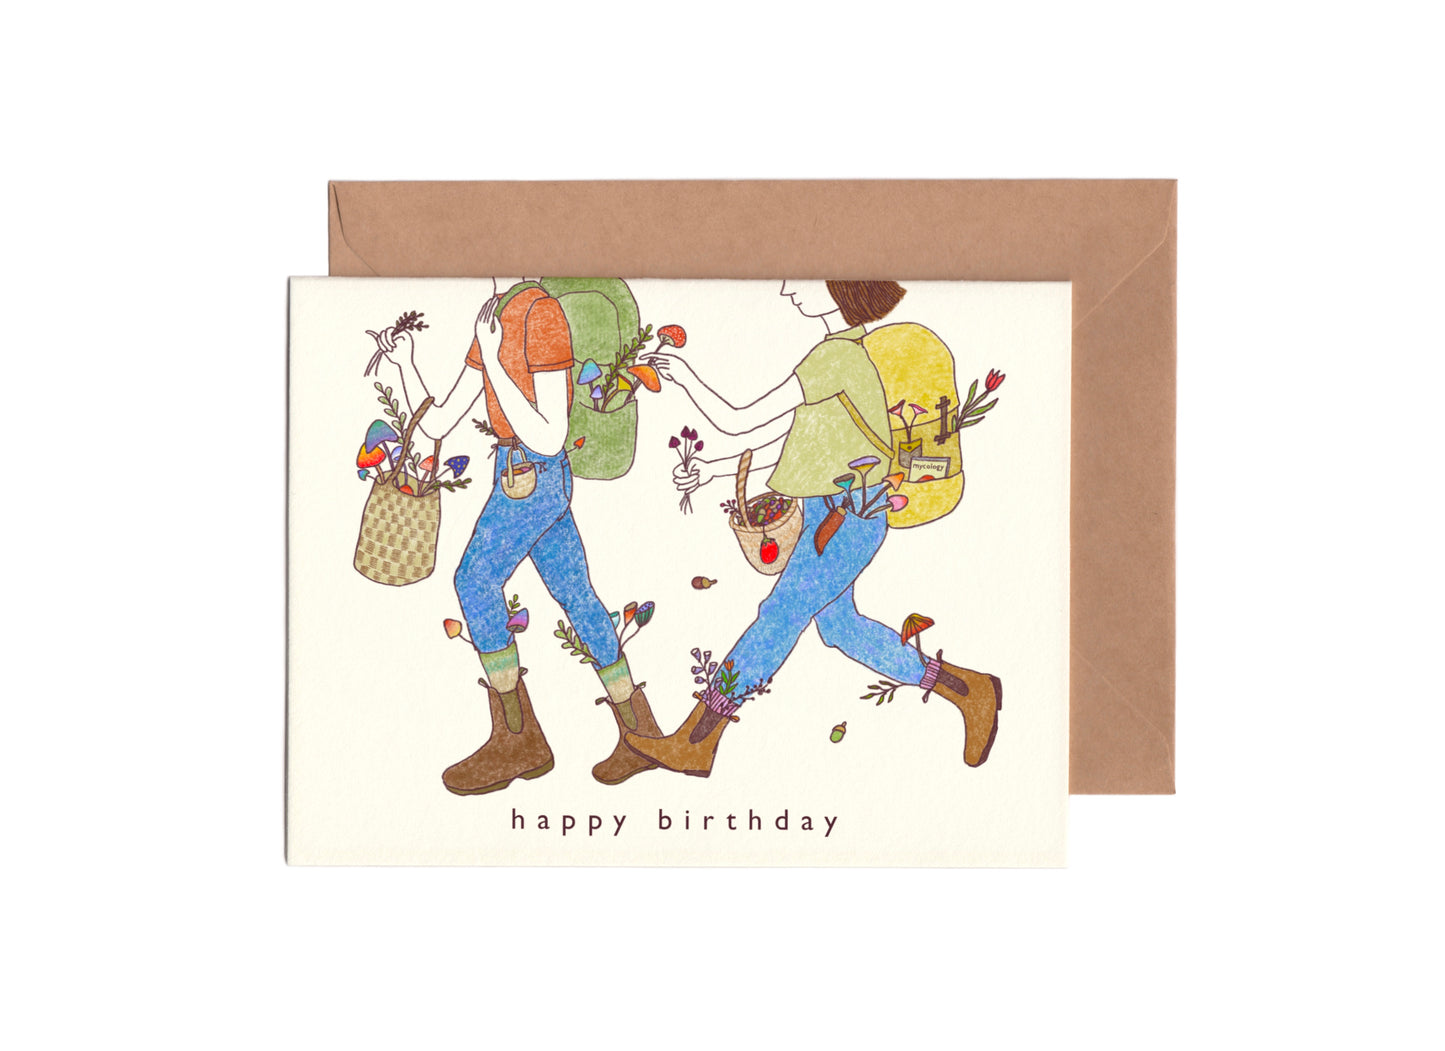 Outdoorsy Birthday Card with the illustration of a couple with backpacks and hiking boots on picking mushrooms and plants together